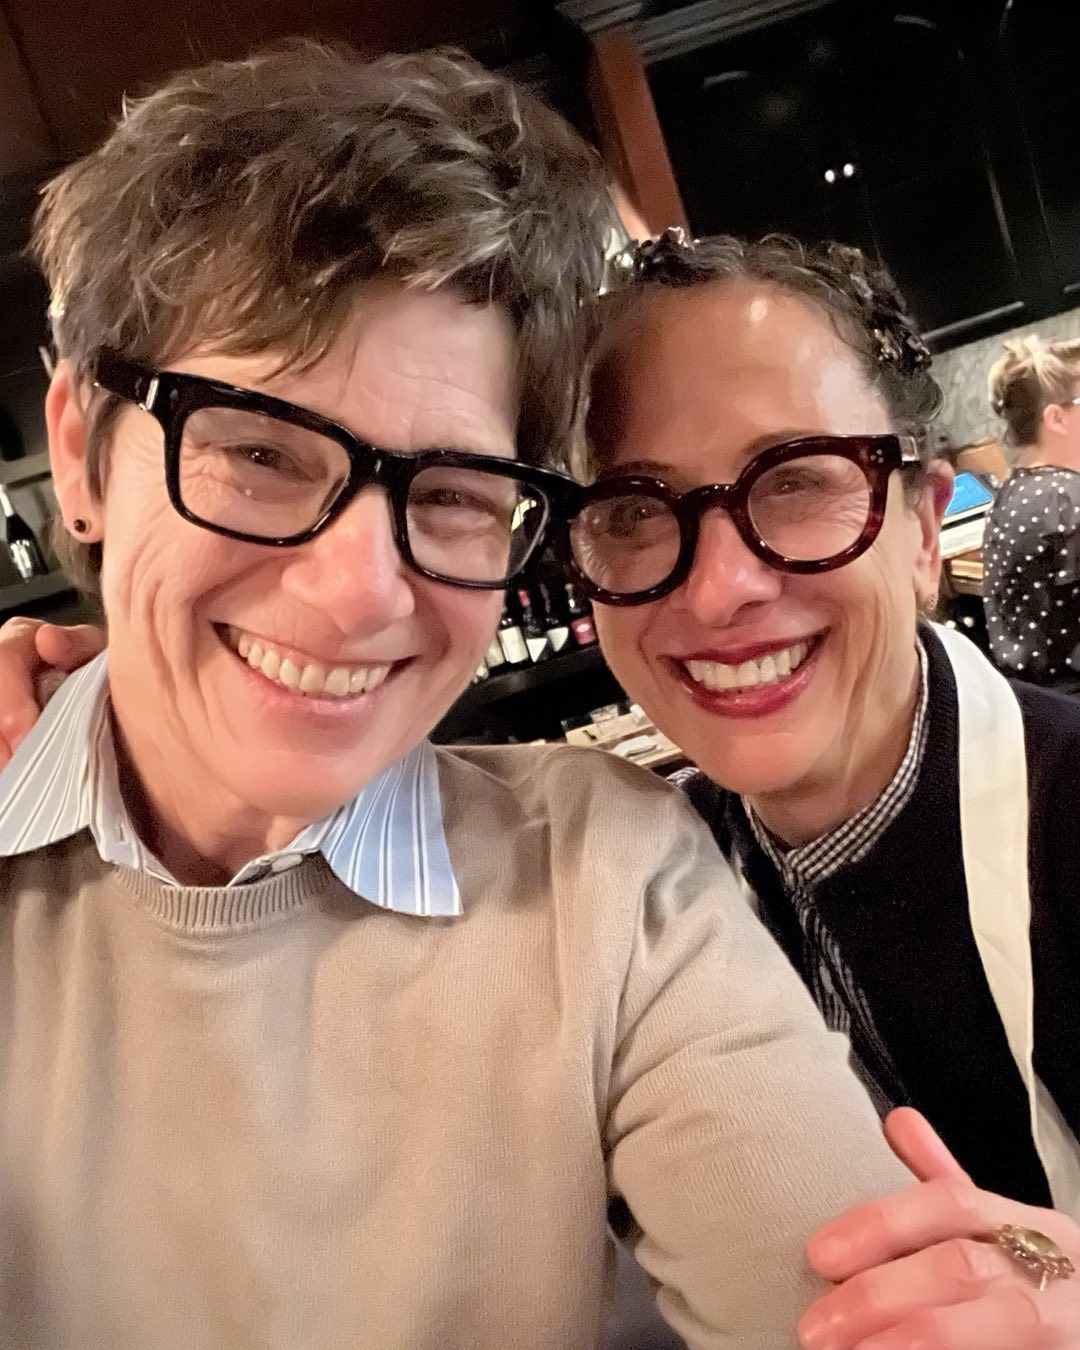 If anyone’s looking for @nancysilverton, I found her (along with some amazing food at @ChiSpacca, including a chocolate cheesecake made with goat and blue from Nieves Barragán Mohacho, the chef who runs @Sabor in London)